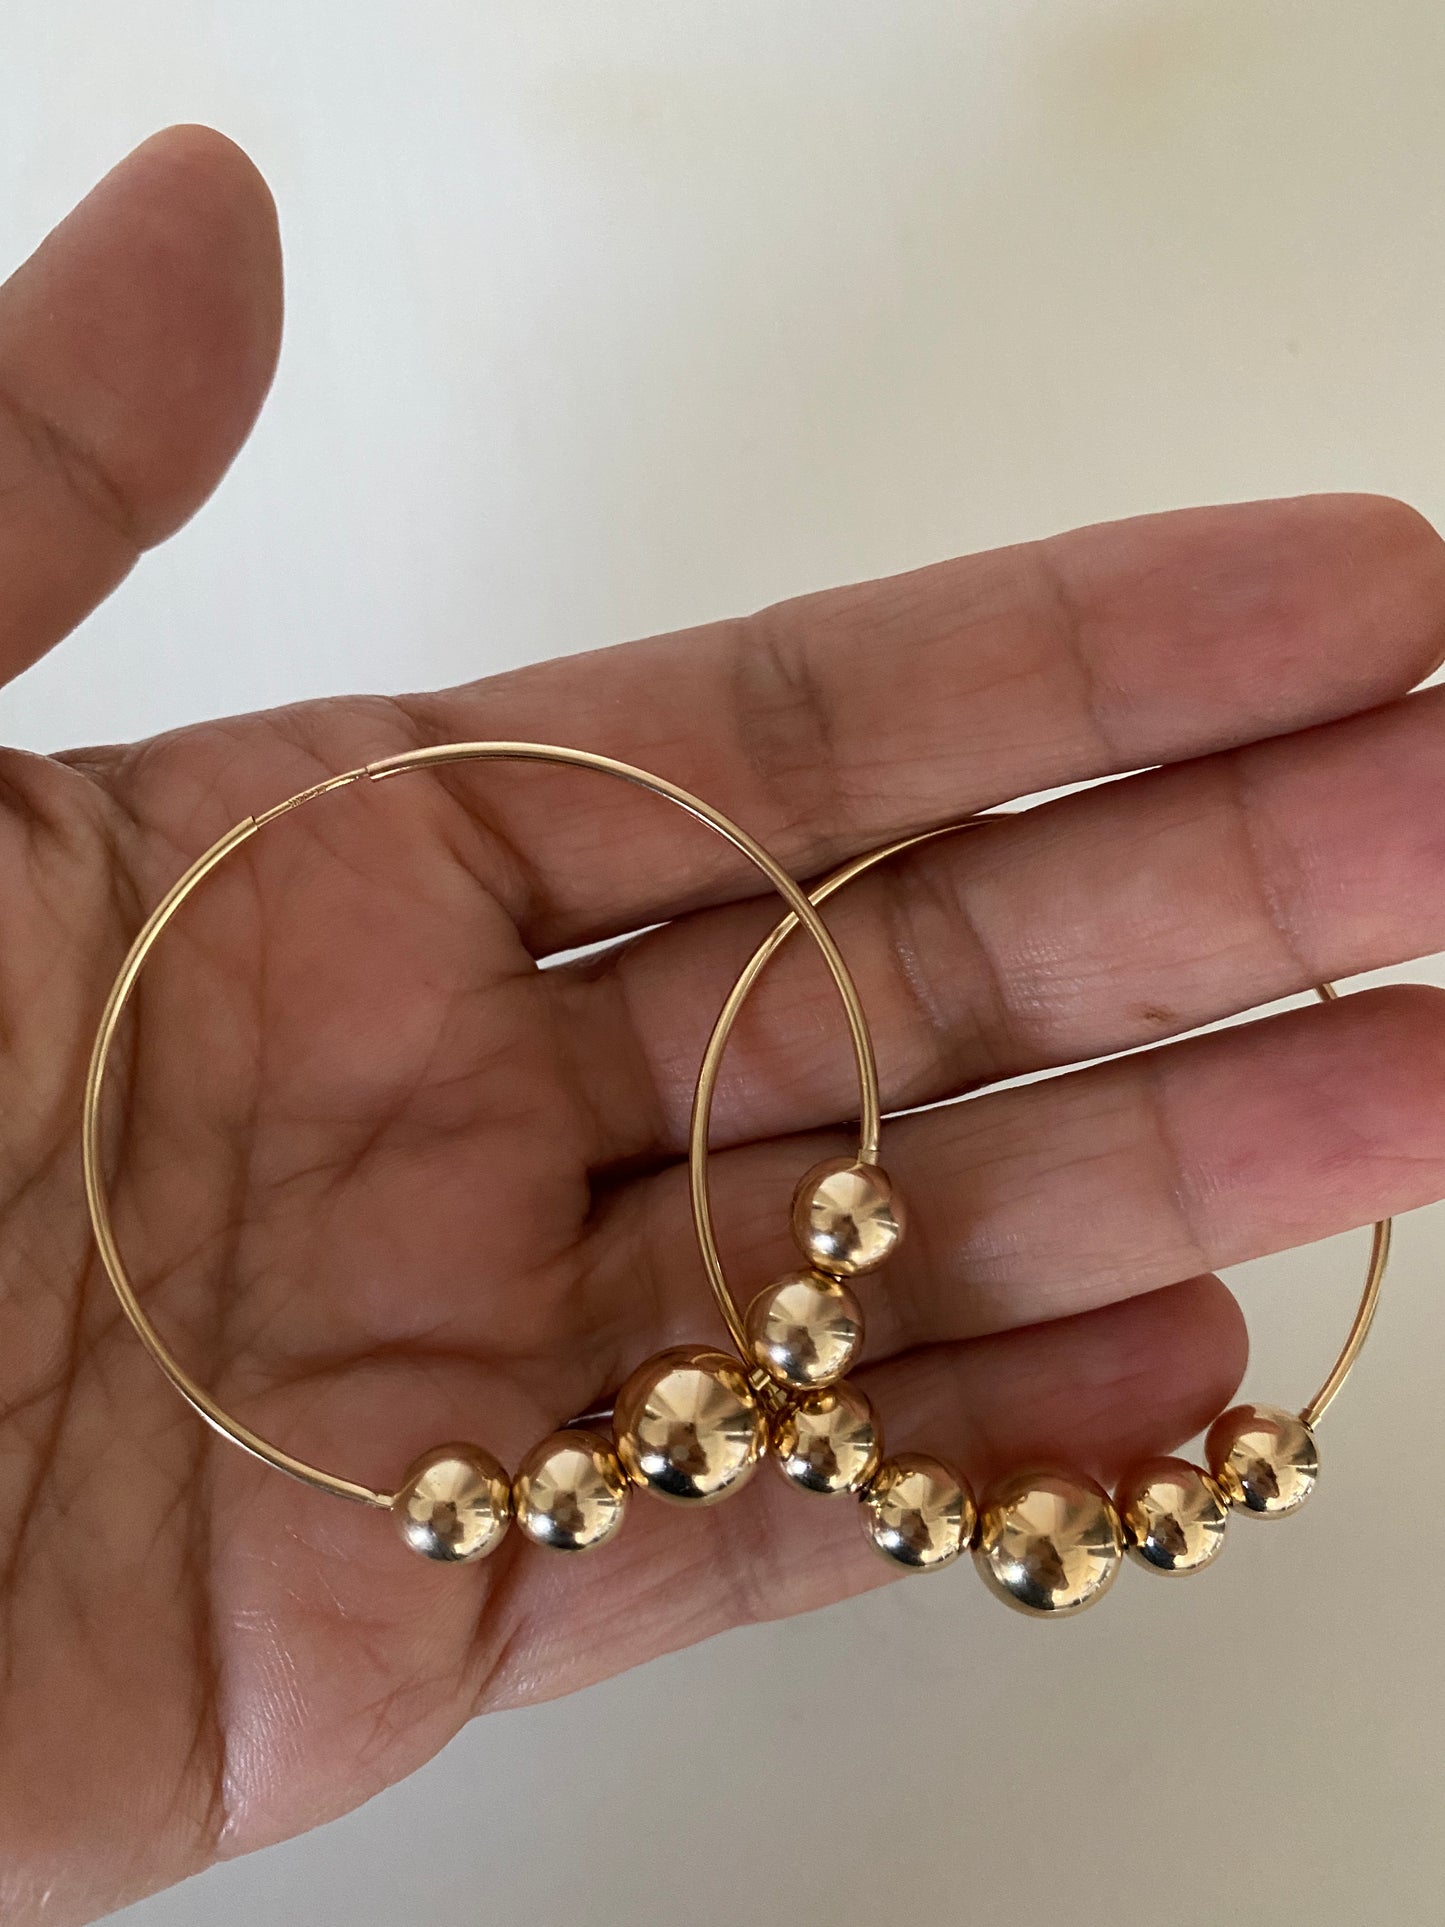 Capri 2" endless hoops with 5 large beads in 14KT Gold filled